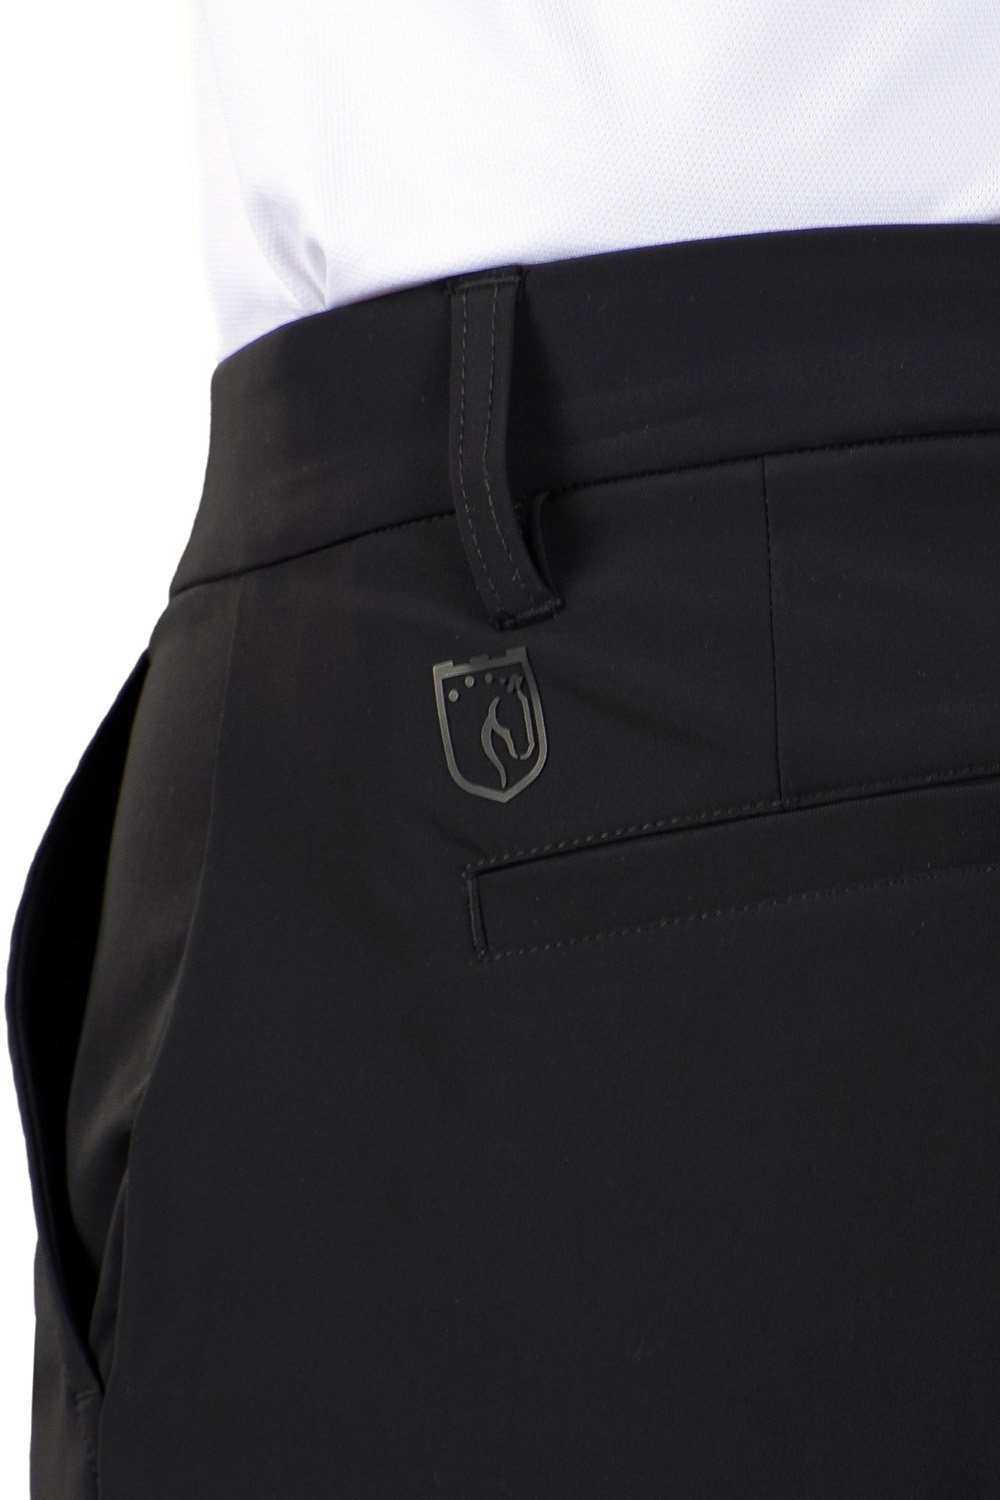 Icon 11" Inseam Short Black by Covel